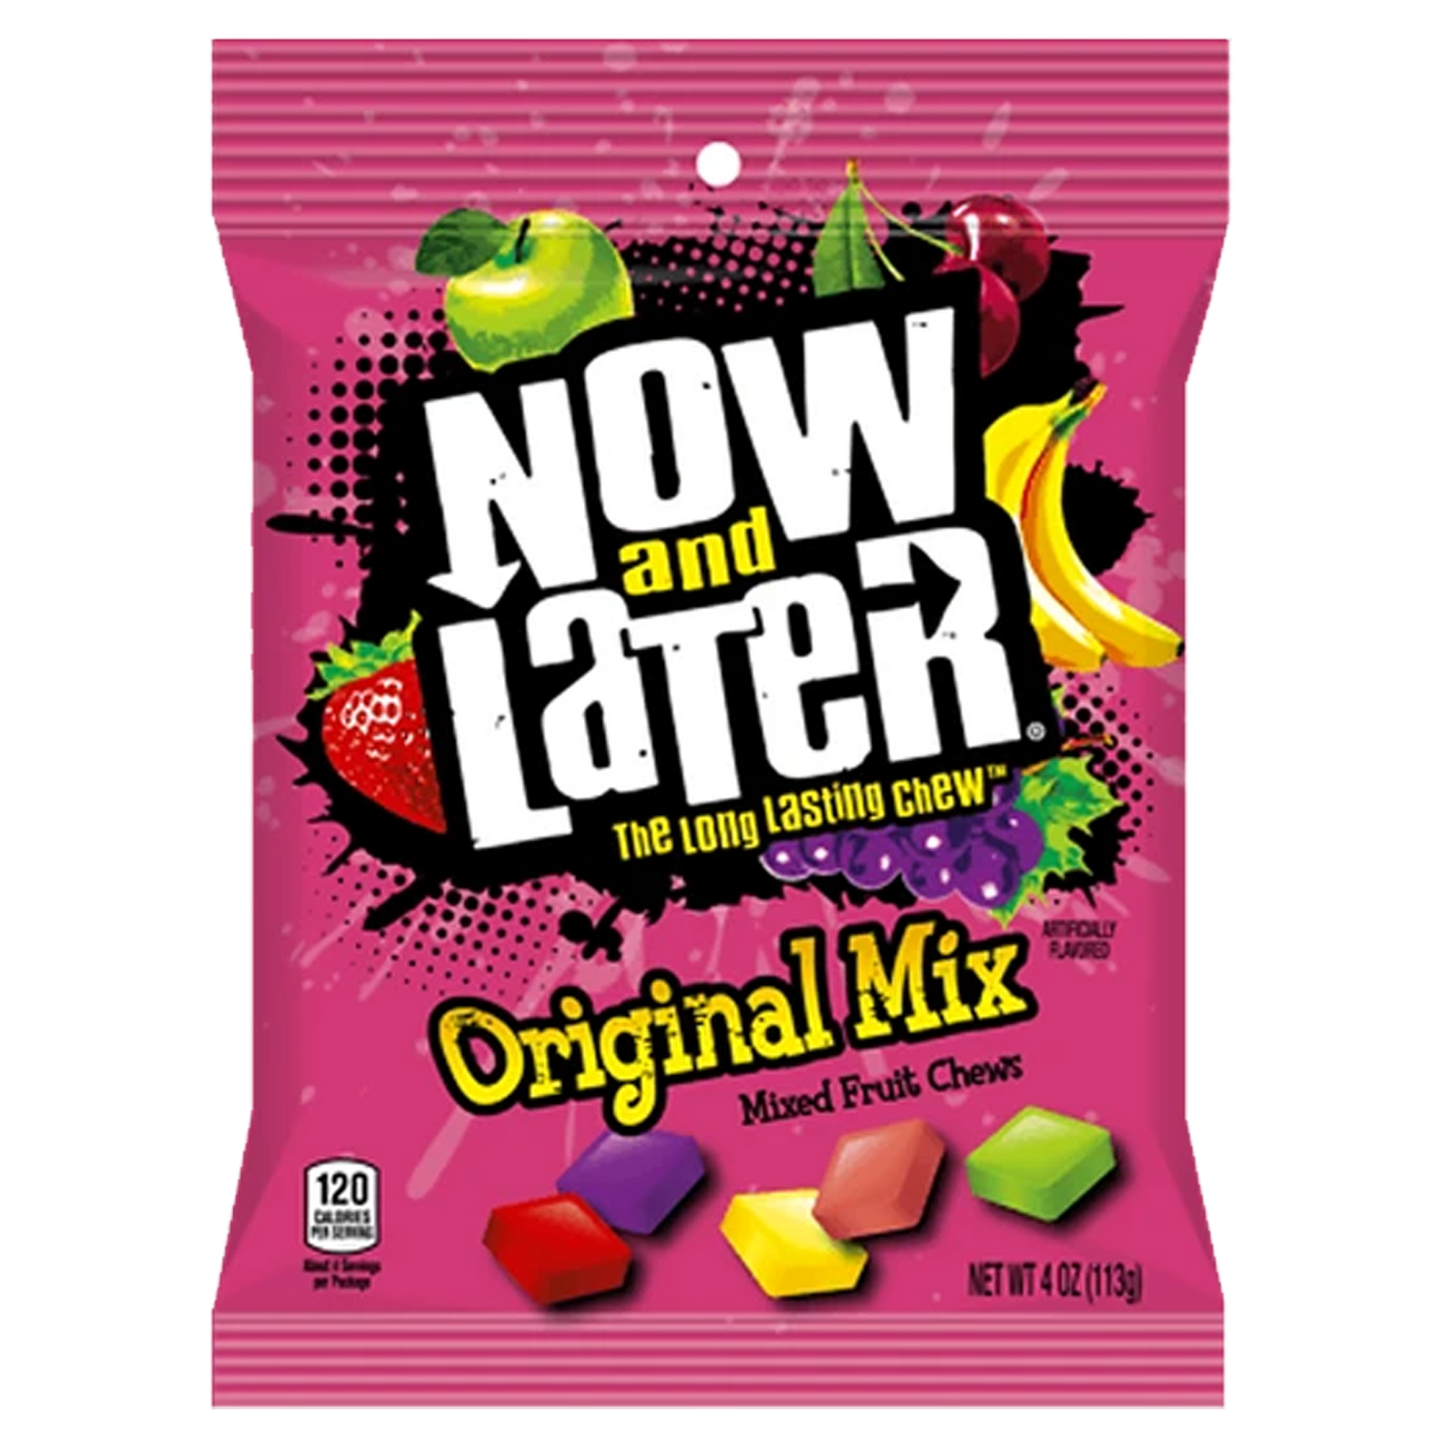 Now and Later Original Mixed Fruit Chews 113g